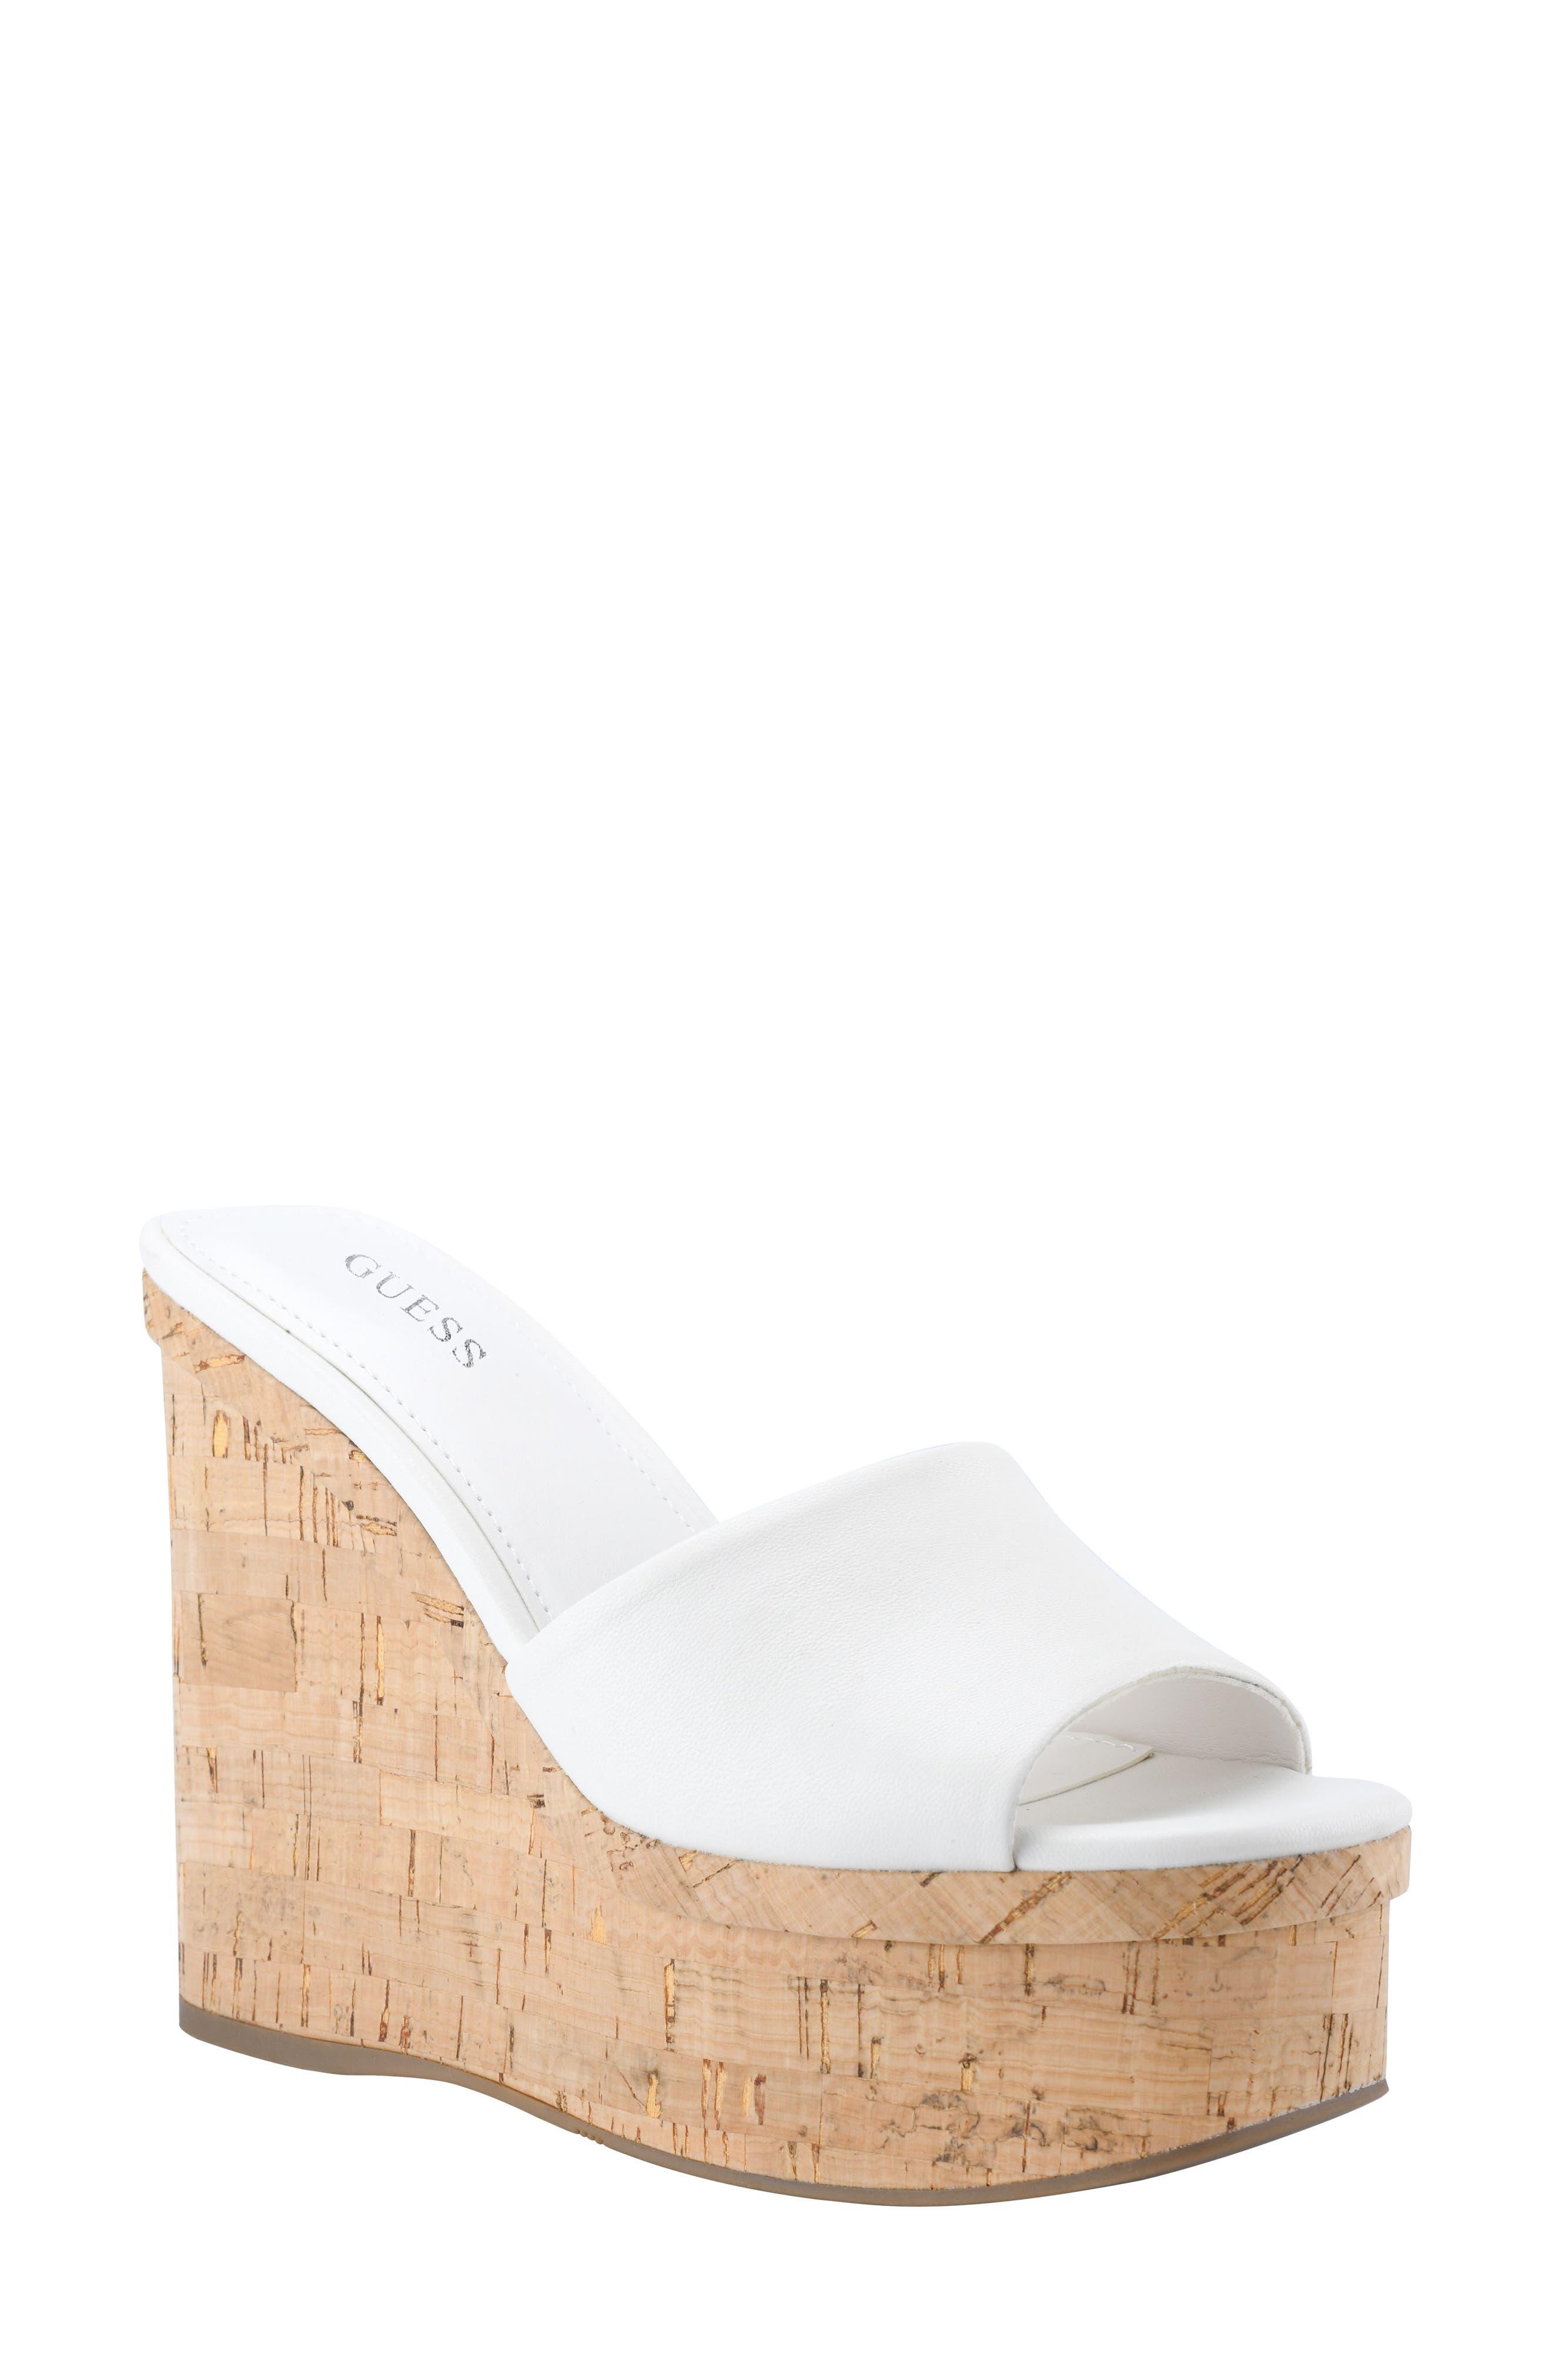 Guess Catia Platform Wedge Sandal in White | Lyst